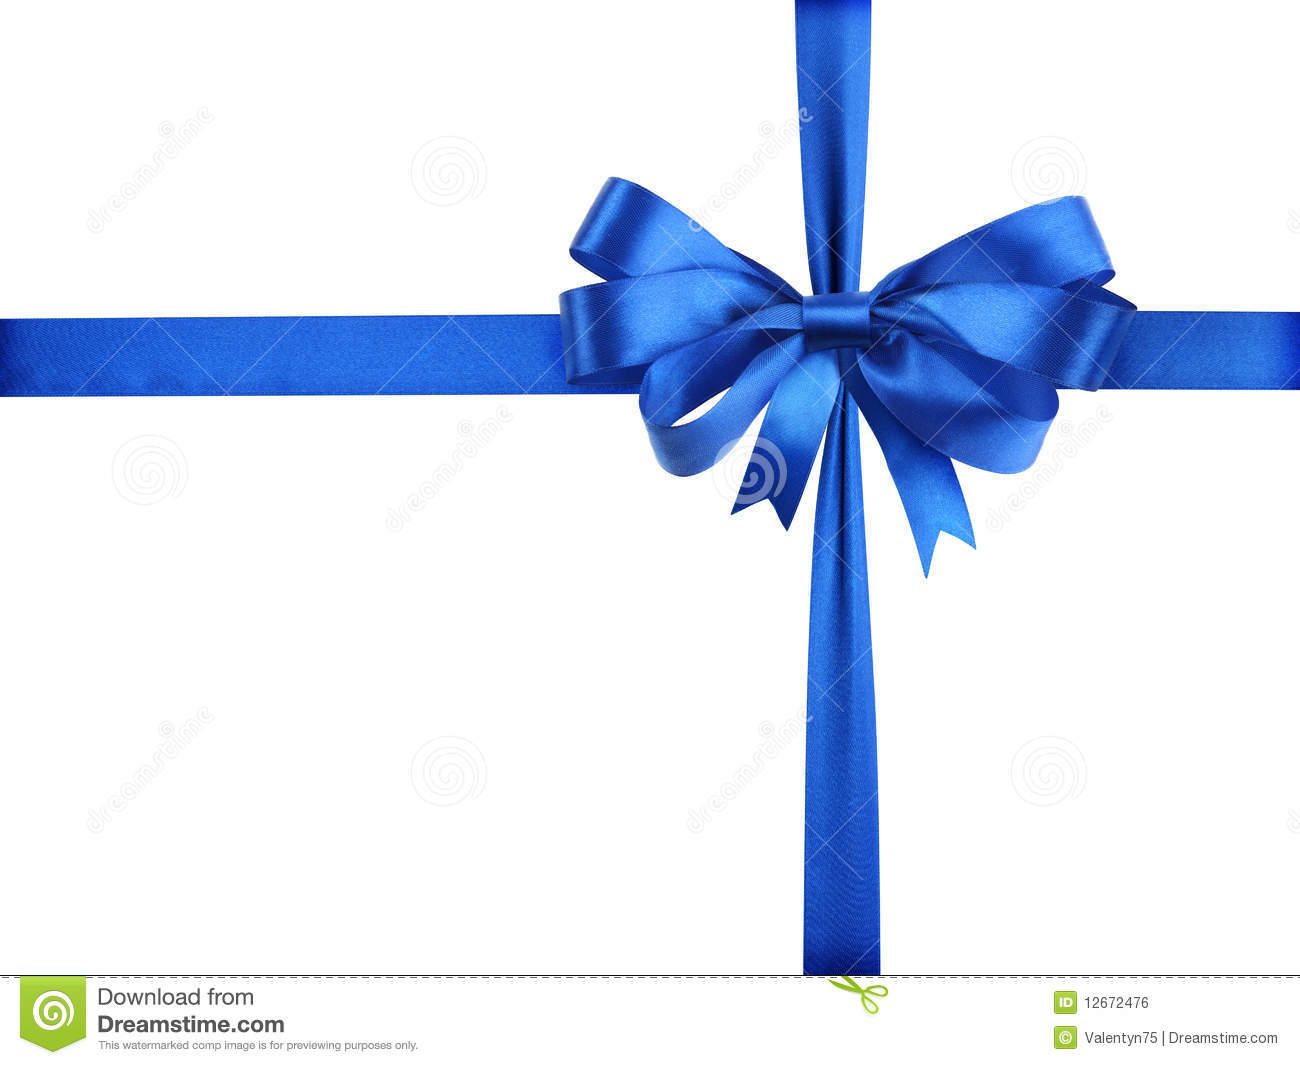 Blue Ribbon With A Bow As A Gift On A White Royalty Free Stock Image